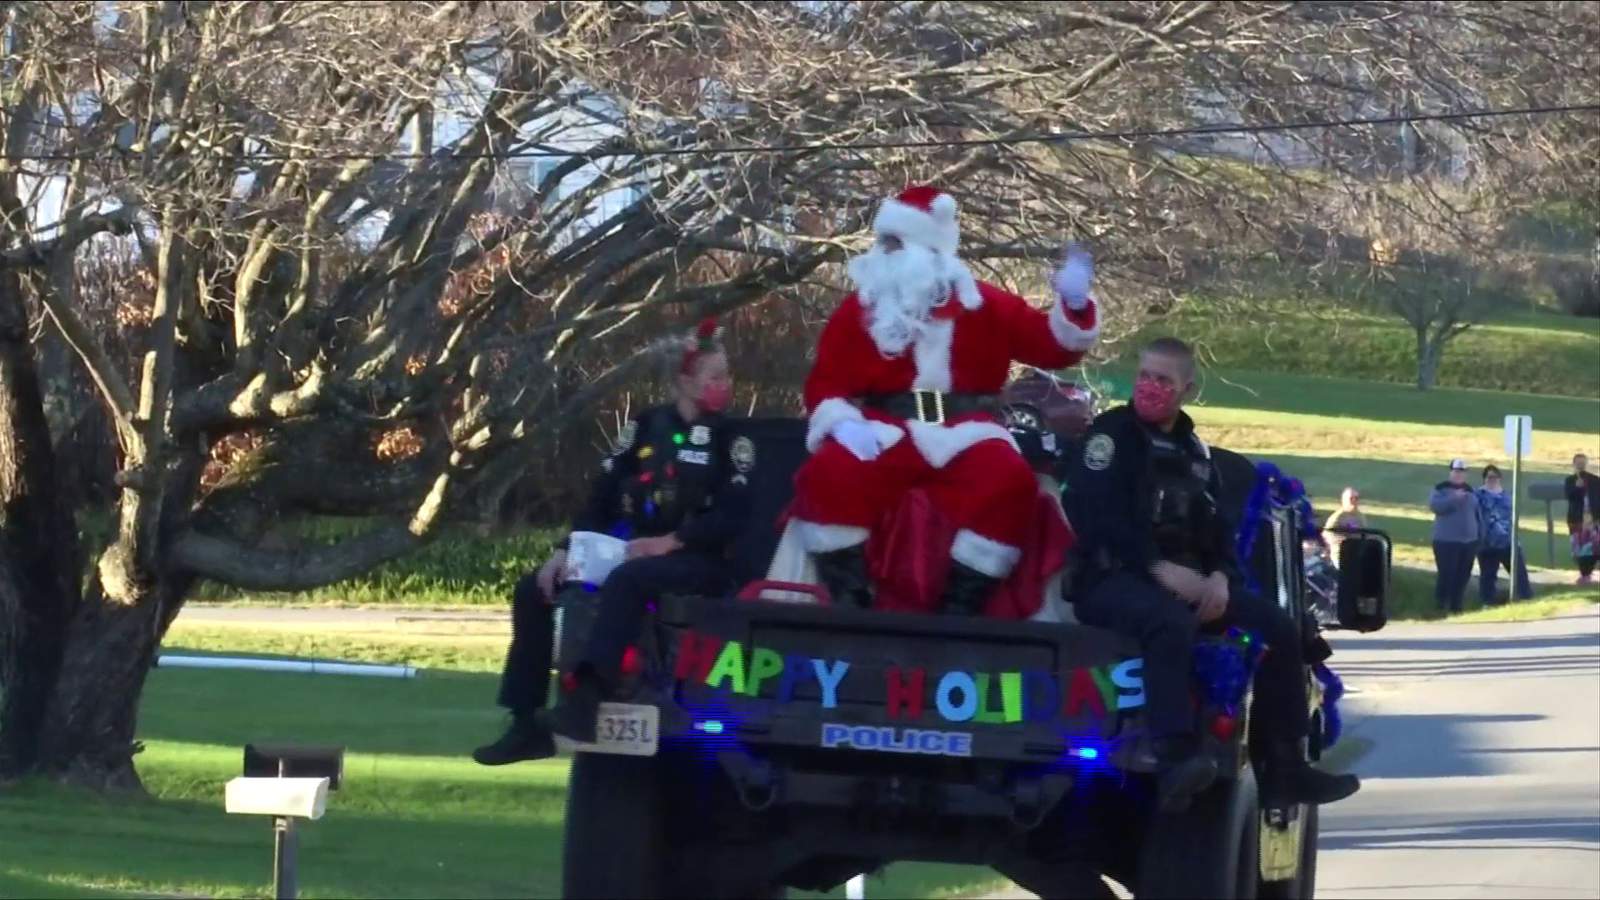 Santa cruises in style with police in Radford